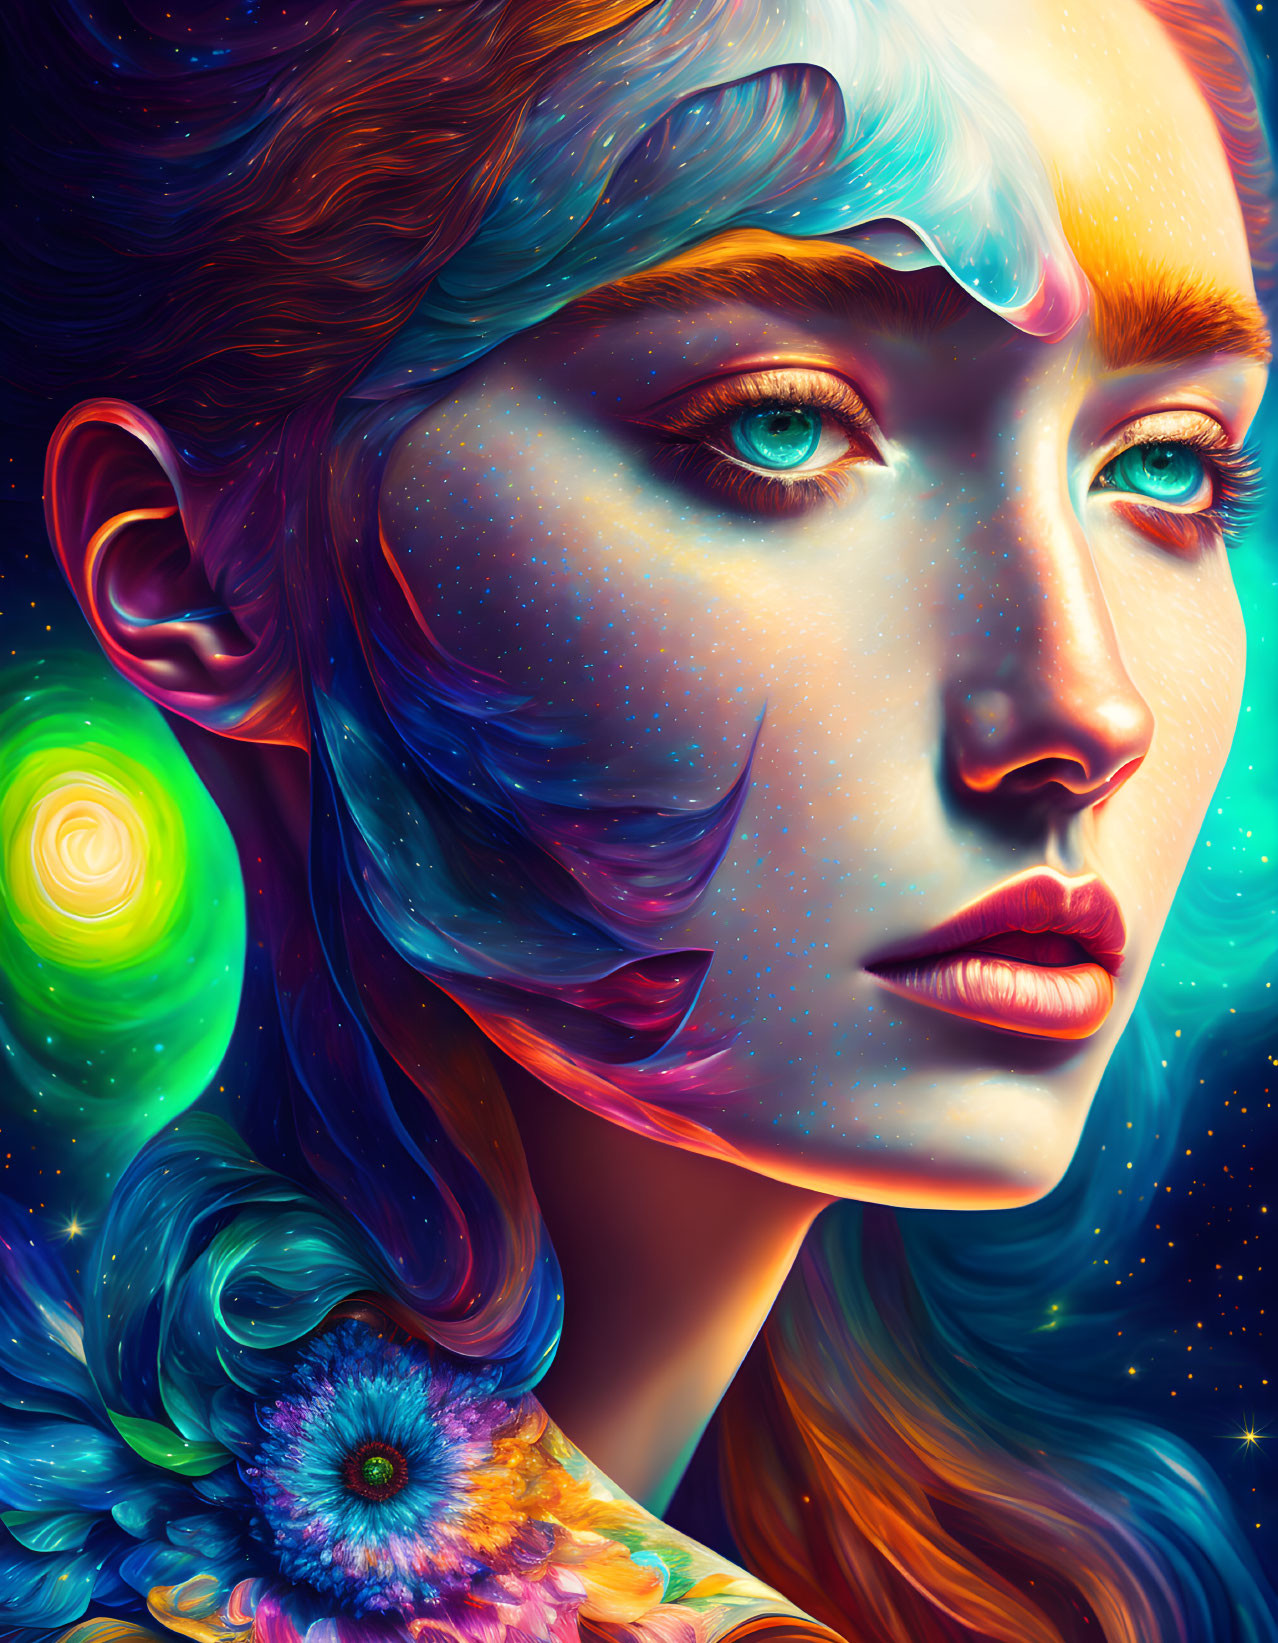 Colorful portrait of a woman with galaxy-themed complexion and celestial hair.